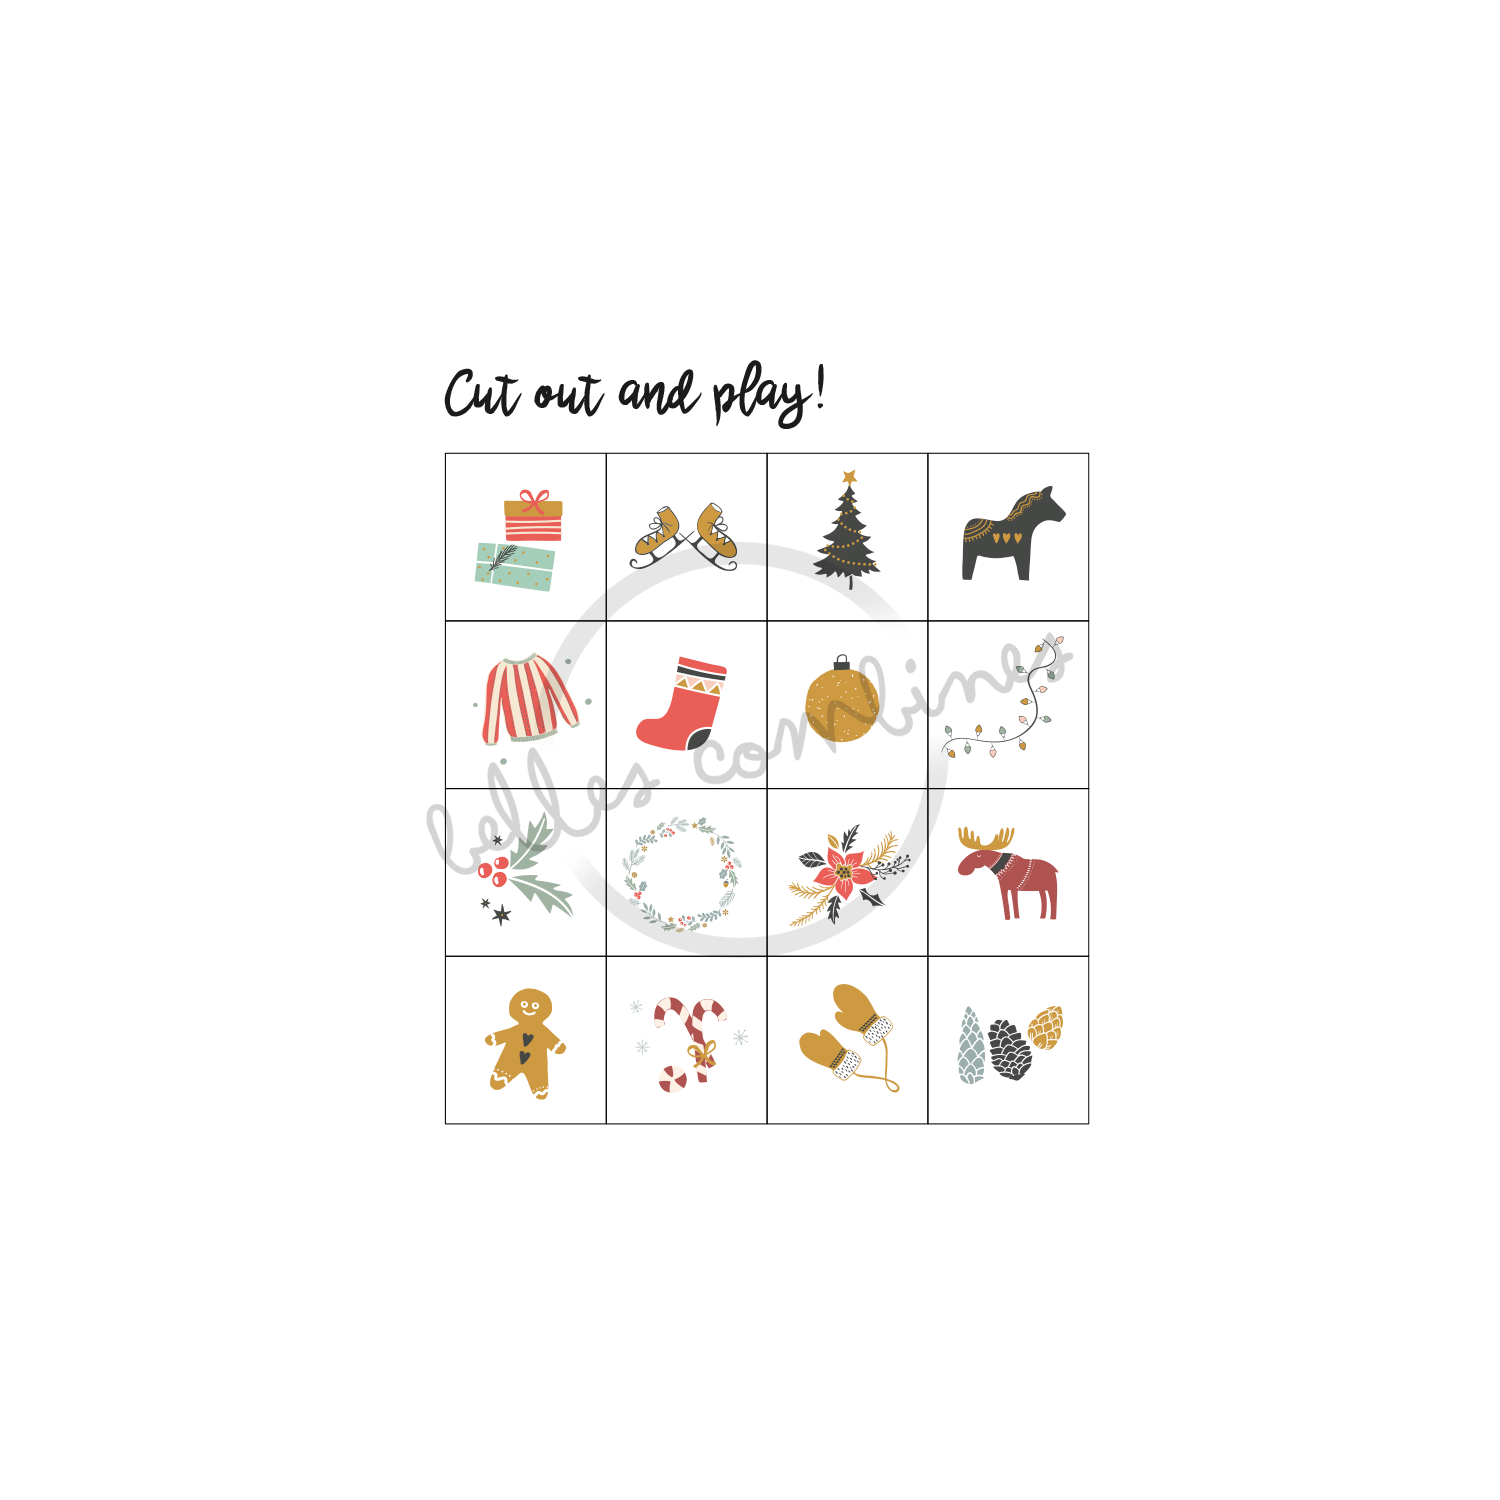 English version of the christmas bingo images made by Les Belles Combines